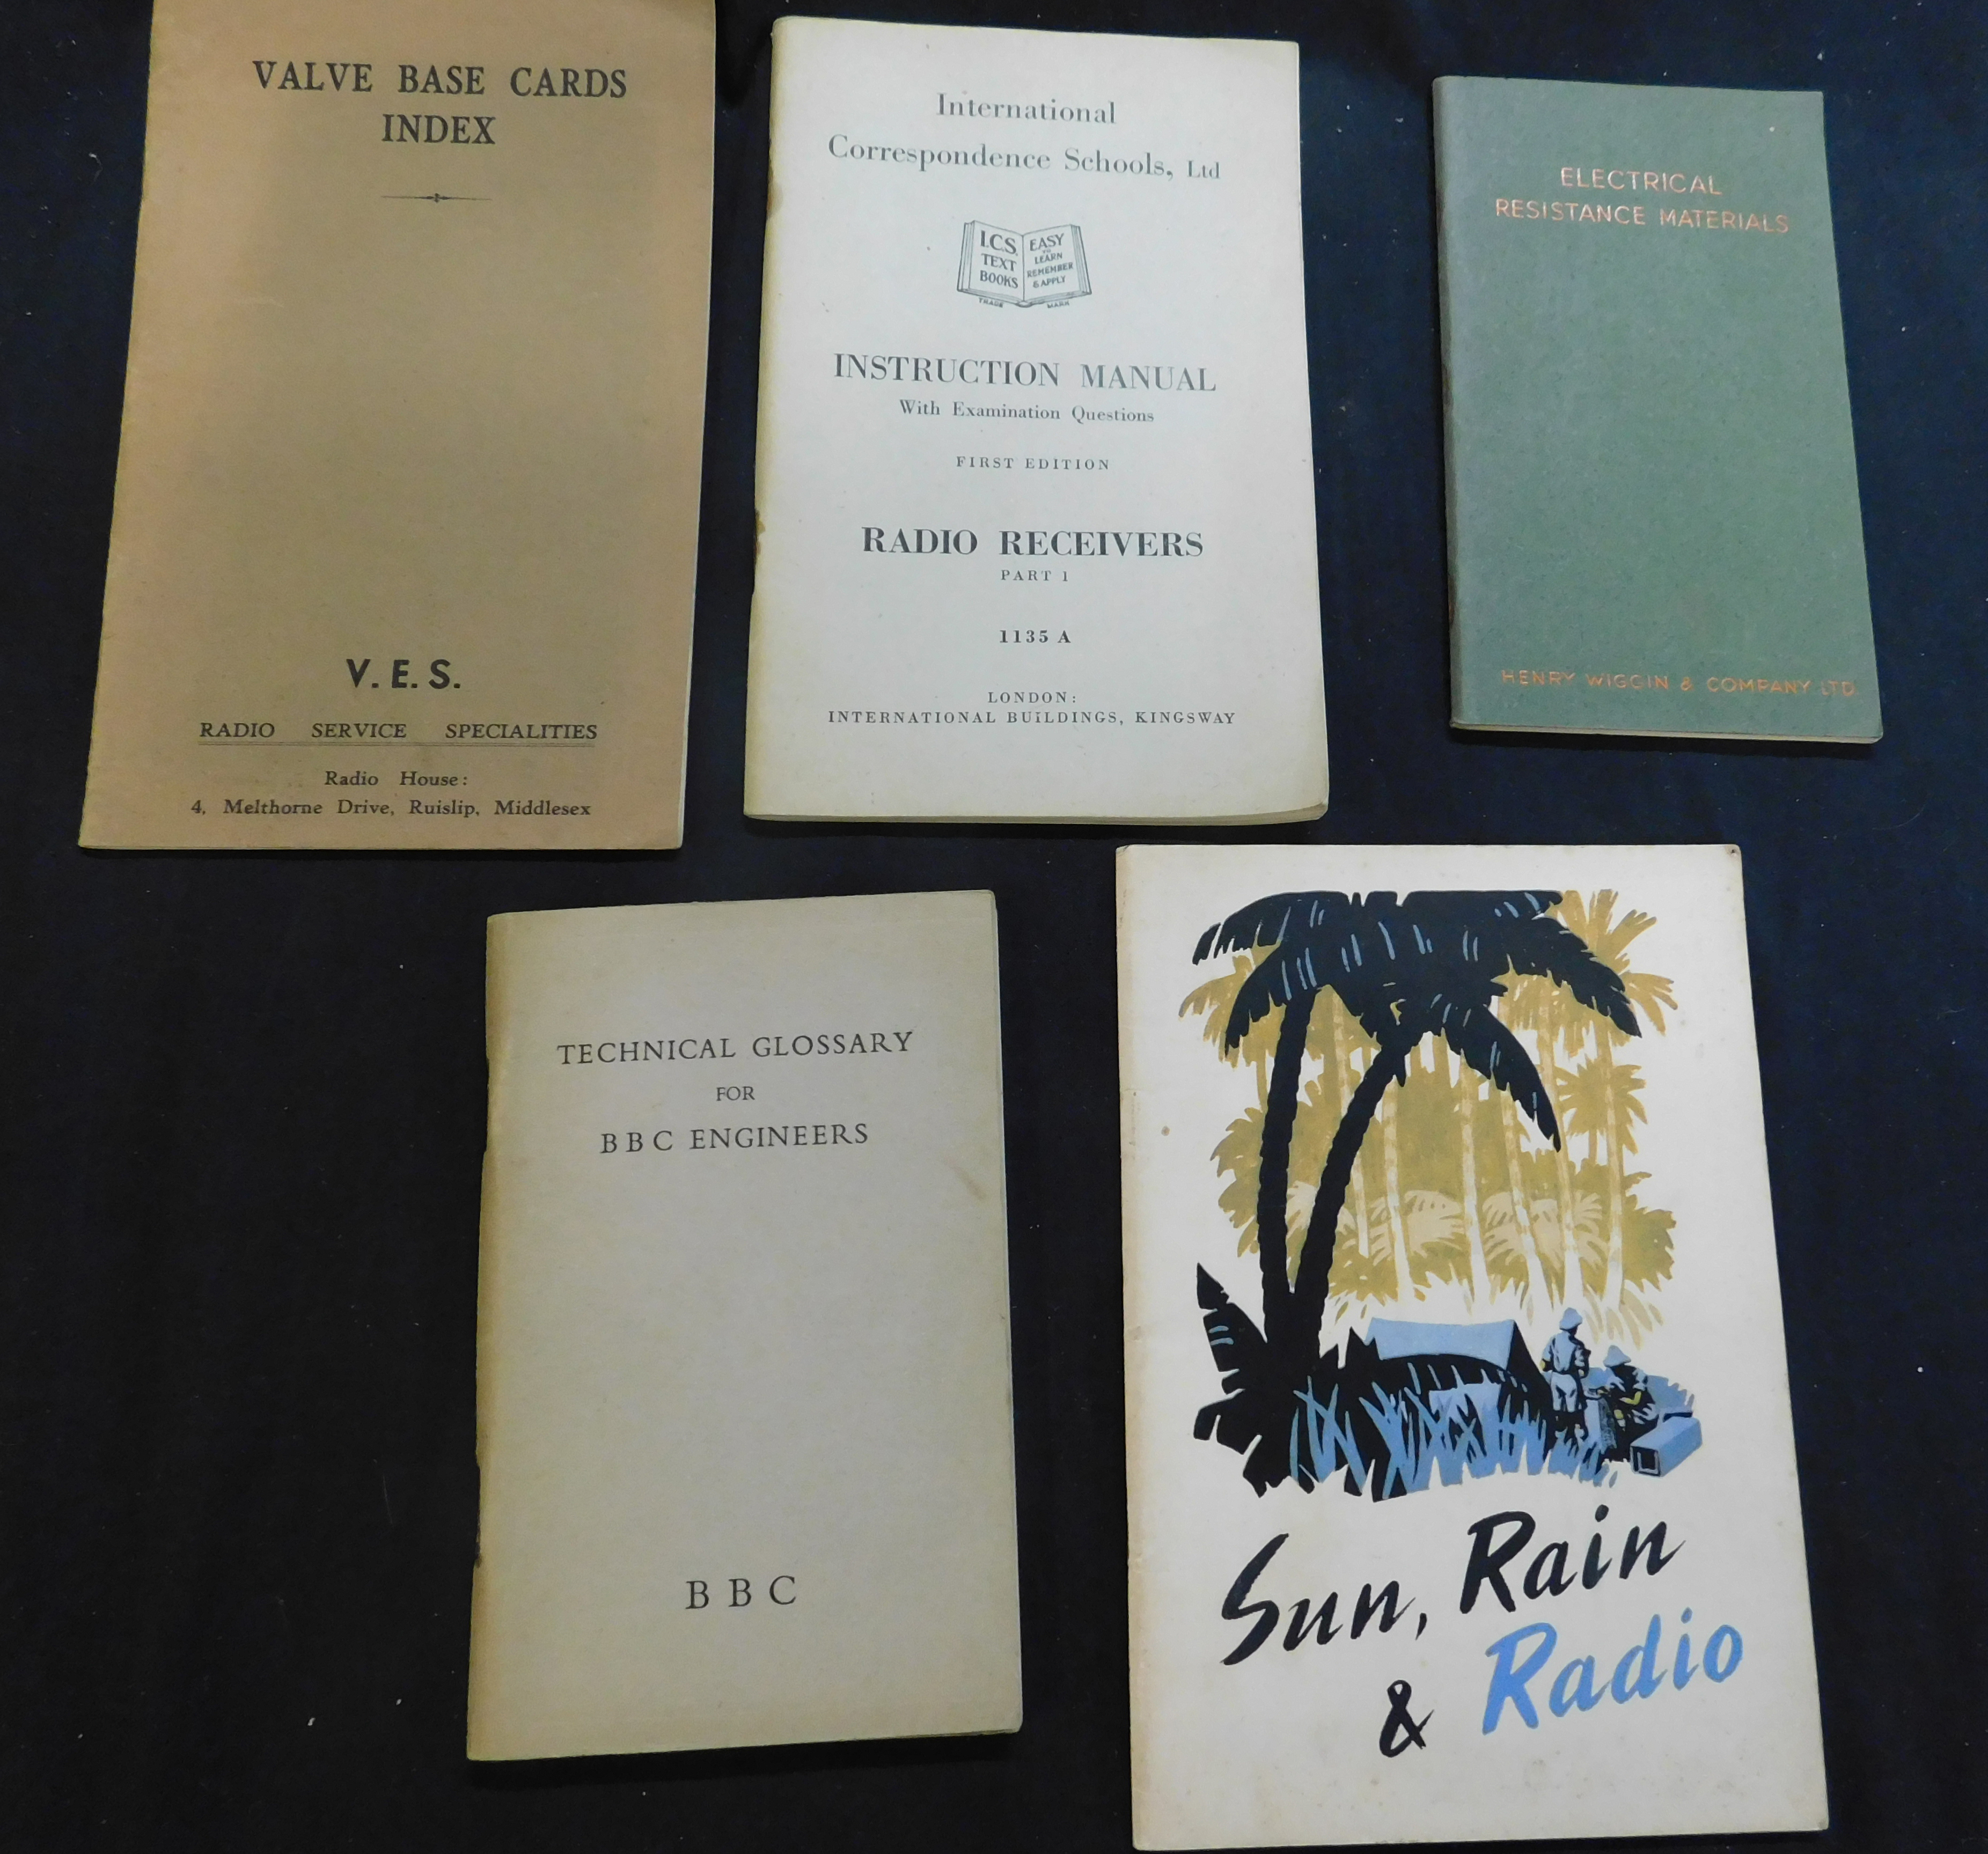 AIR MINISTRY (PUB): SUN RAIN AND RADIO 1945, 1st edition Air Ministry pamphlet, original pictorial - Image 2 of 2